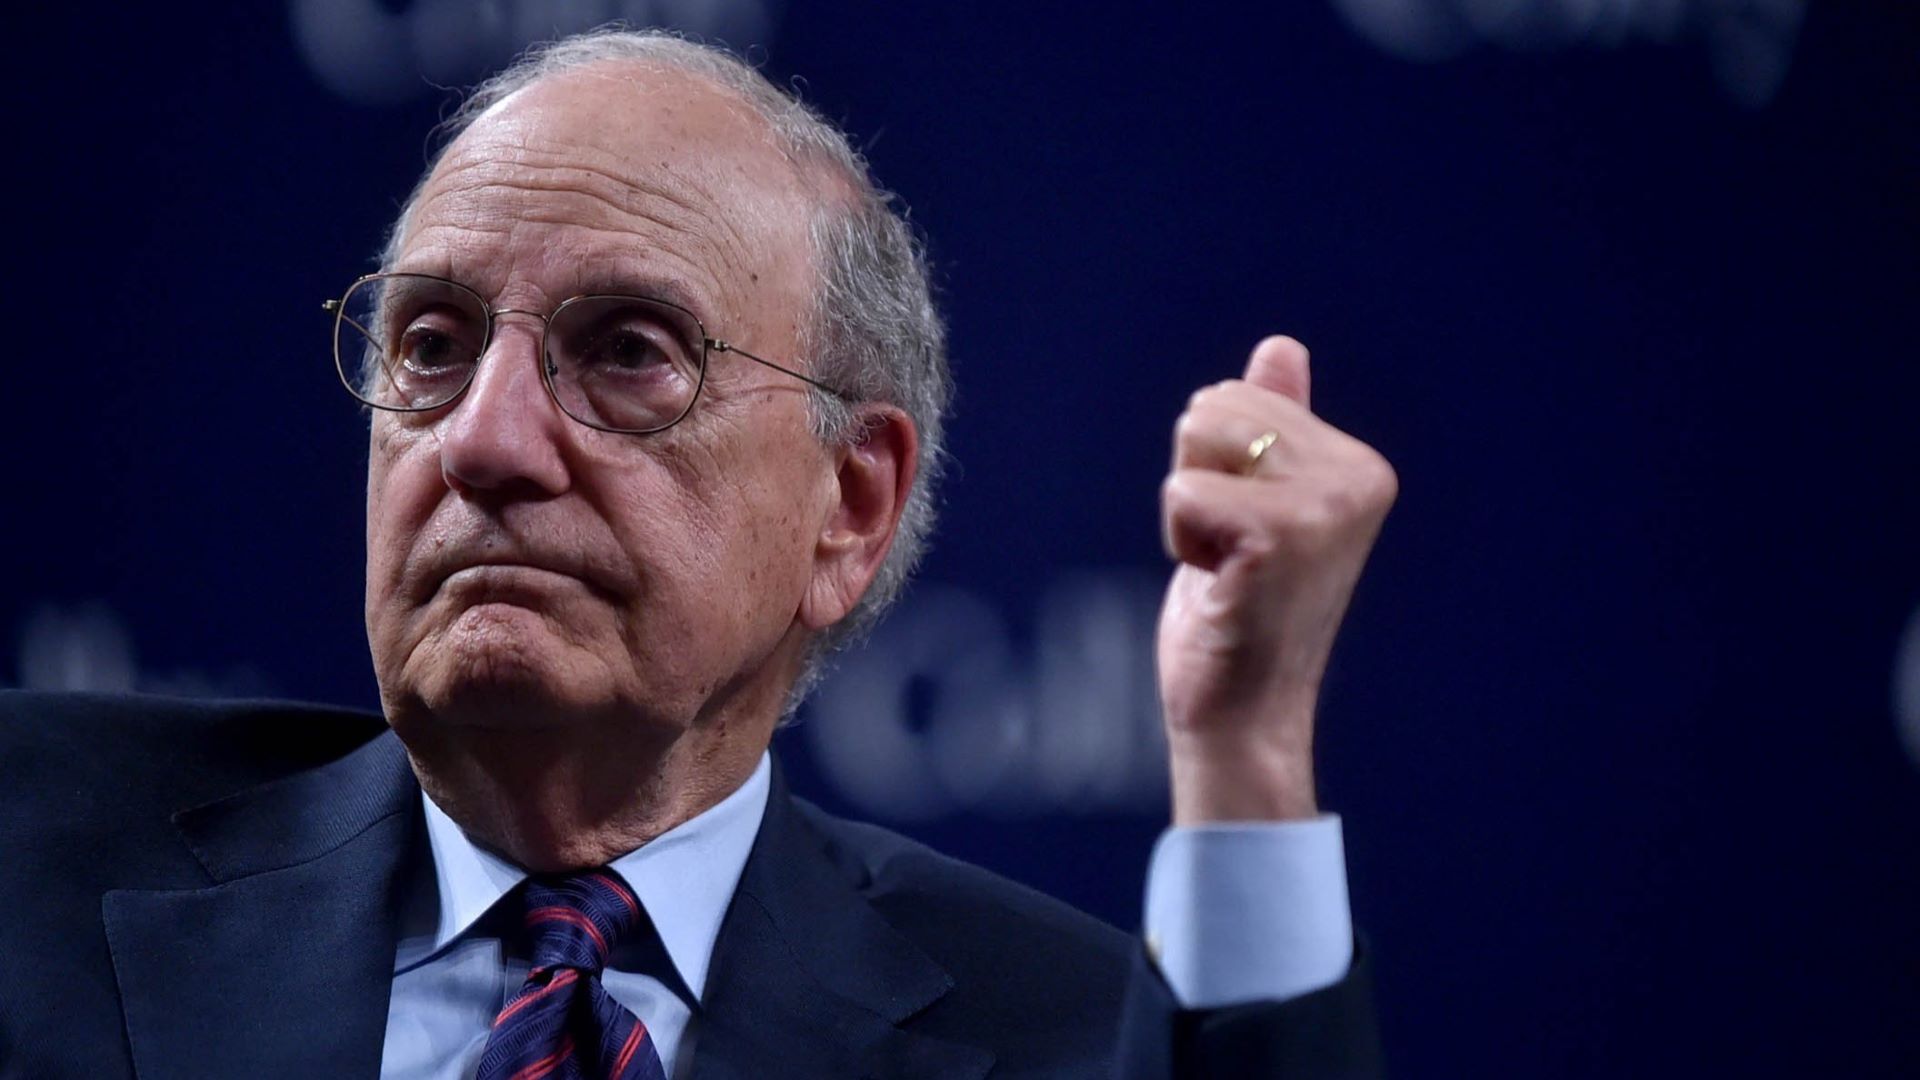 George Mitchell sits and listens to a speaker (not shown) at an event